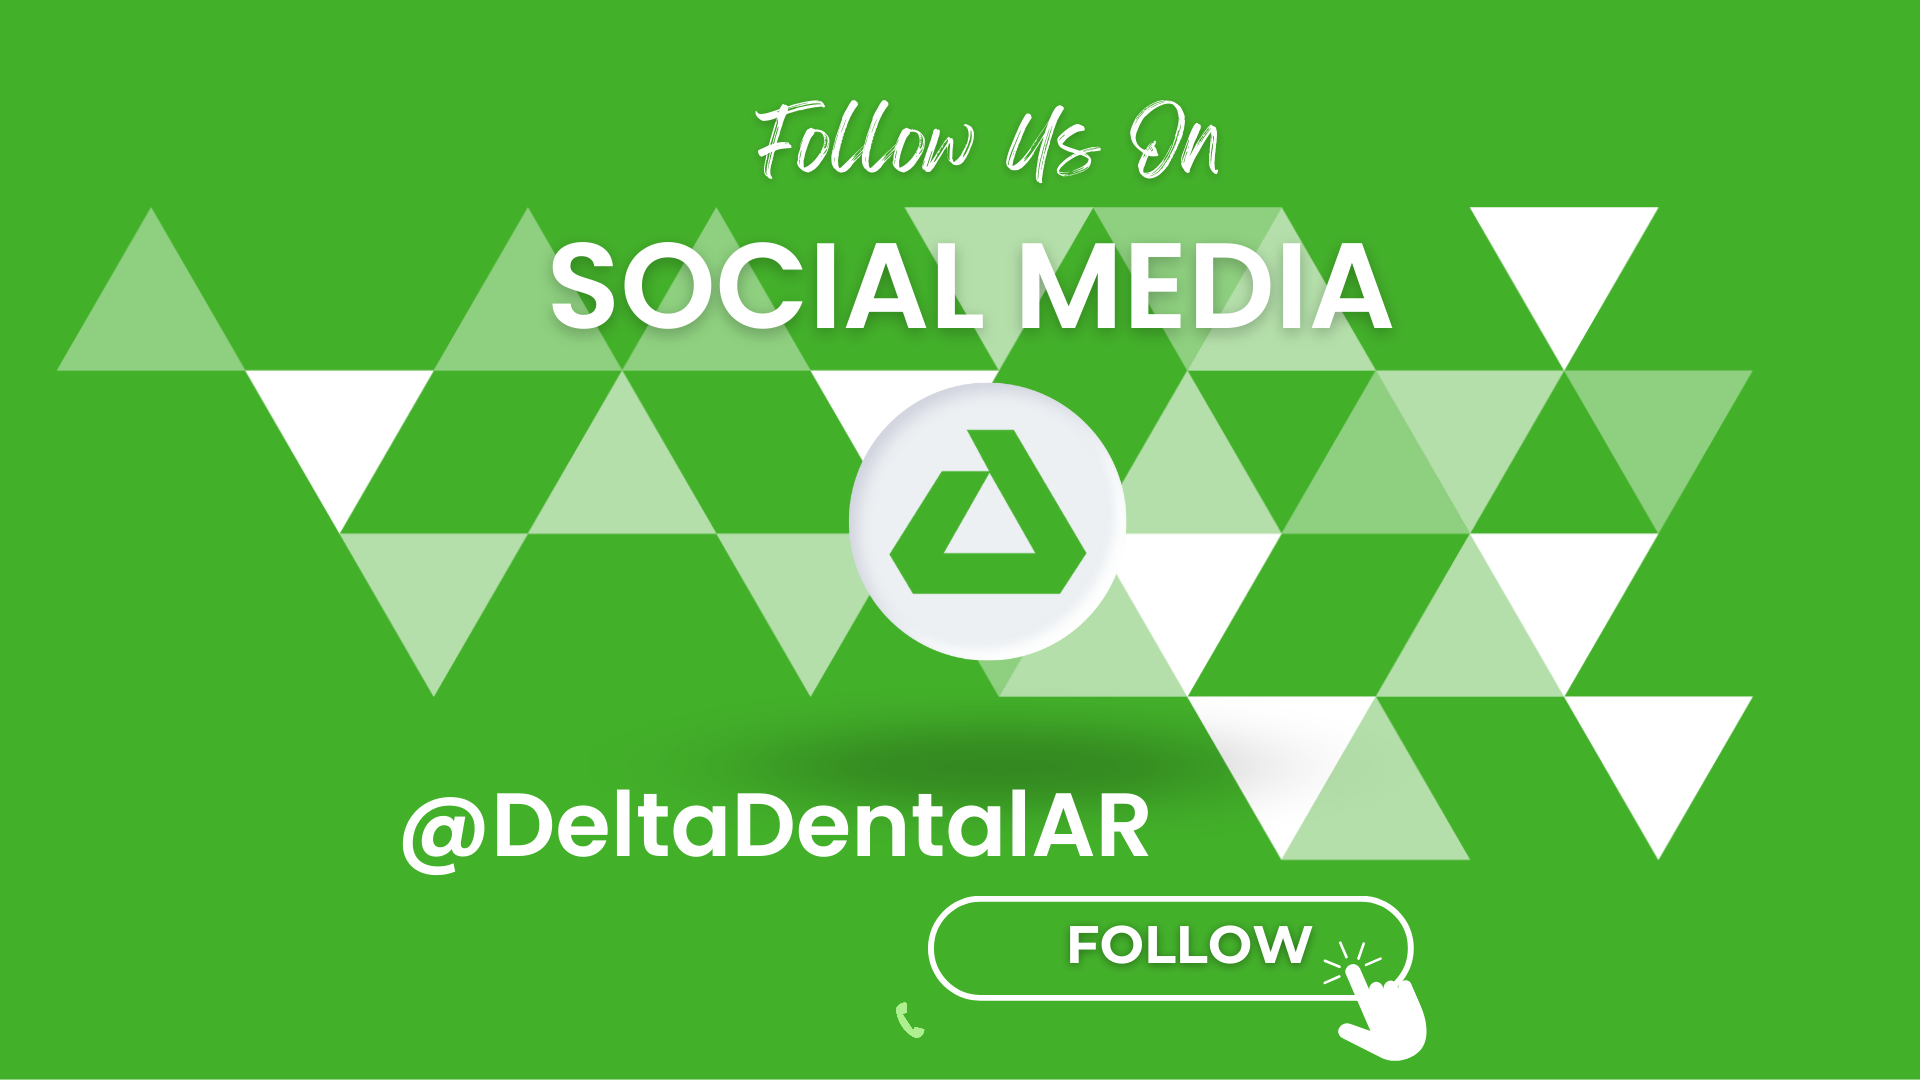 Flyer showing green background with Delta Dental logo and secondary graphic